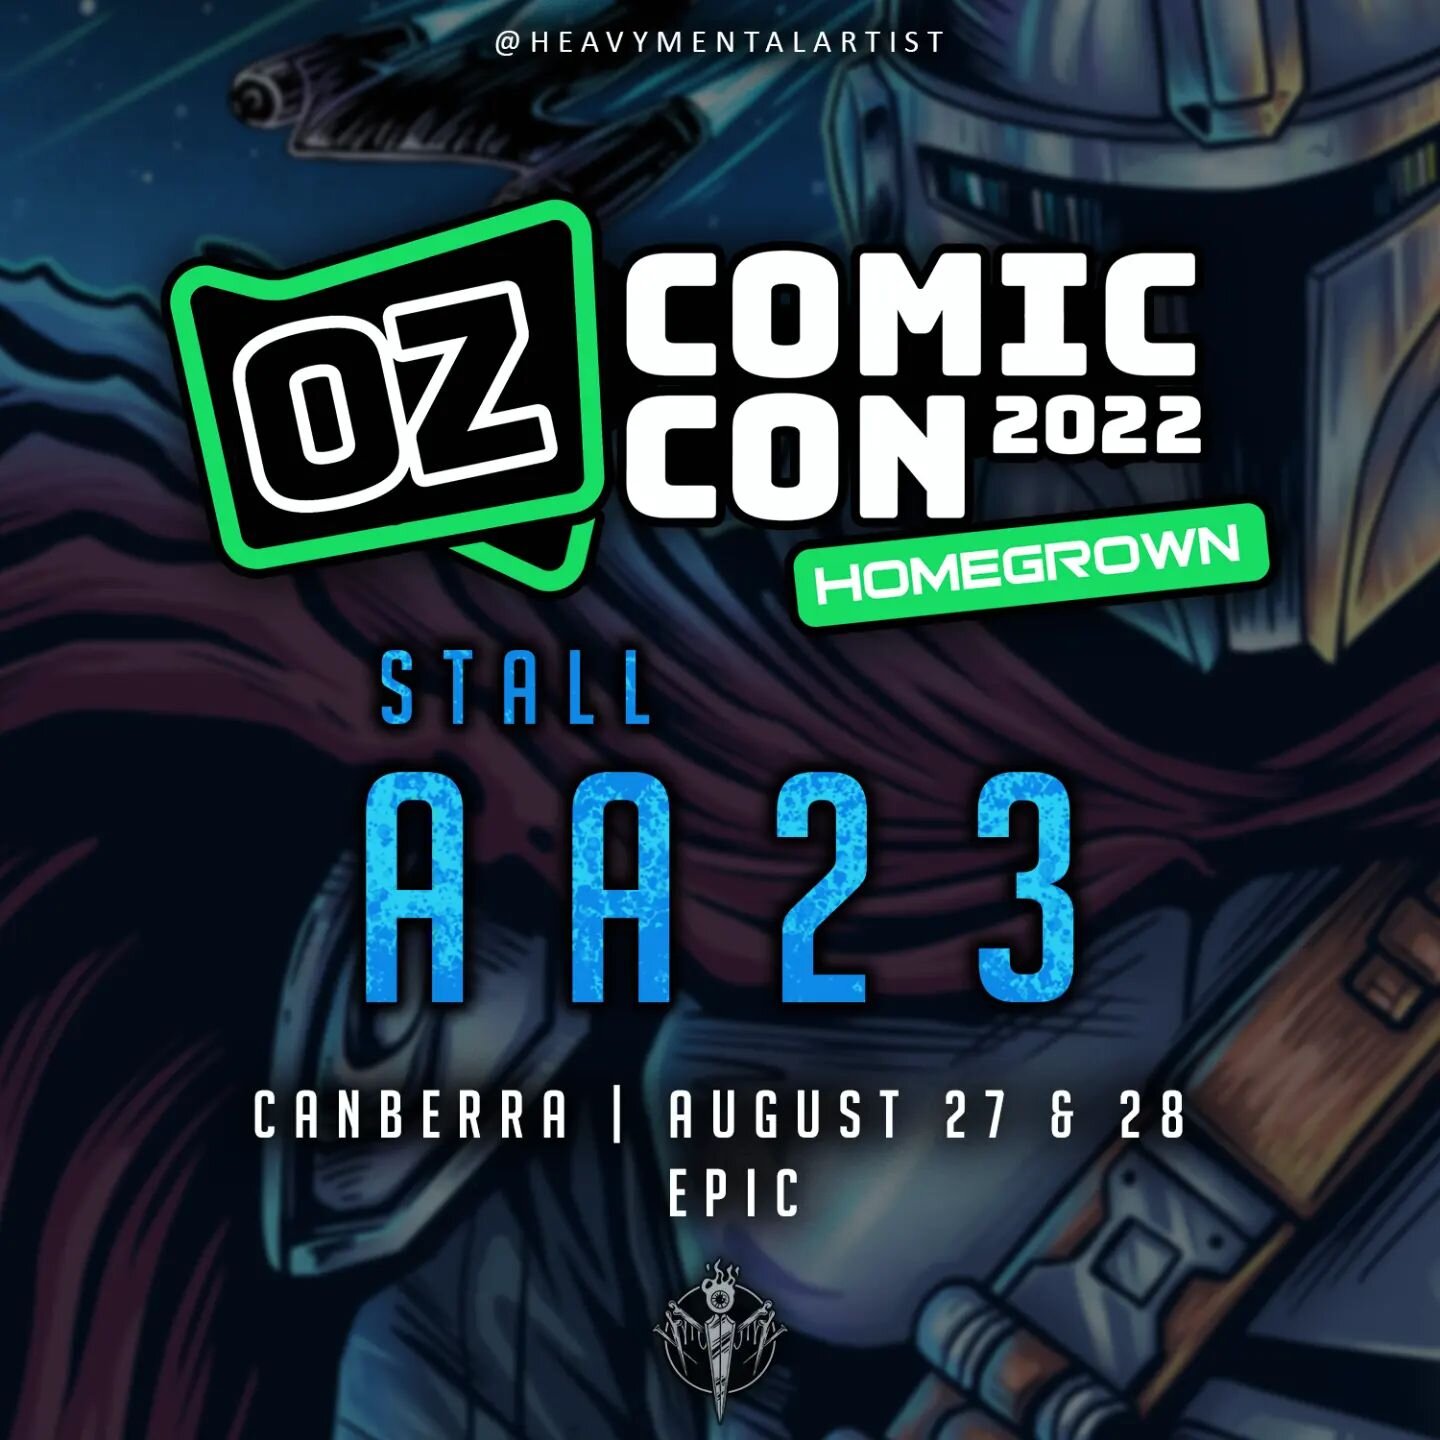 Excited to be back down in Canberra for @ozcomiccon first Canberra event this weekend, Stall:AA23 in the artists alley. I'll have some new art I've been working on and can't wait to sure, feel free to drop by for a chat! See you there. 

Event Info:
